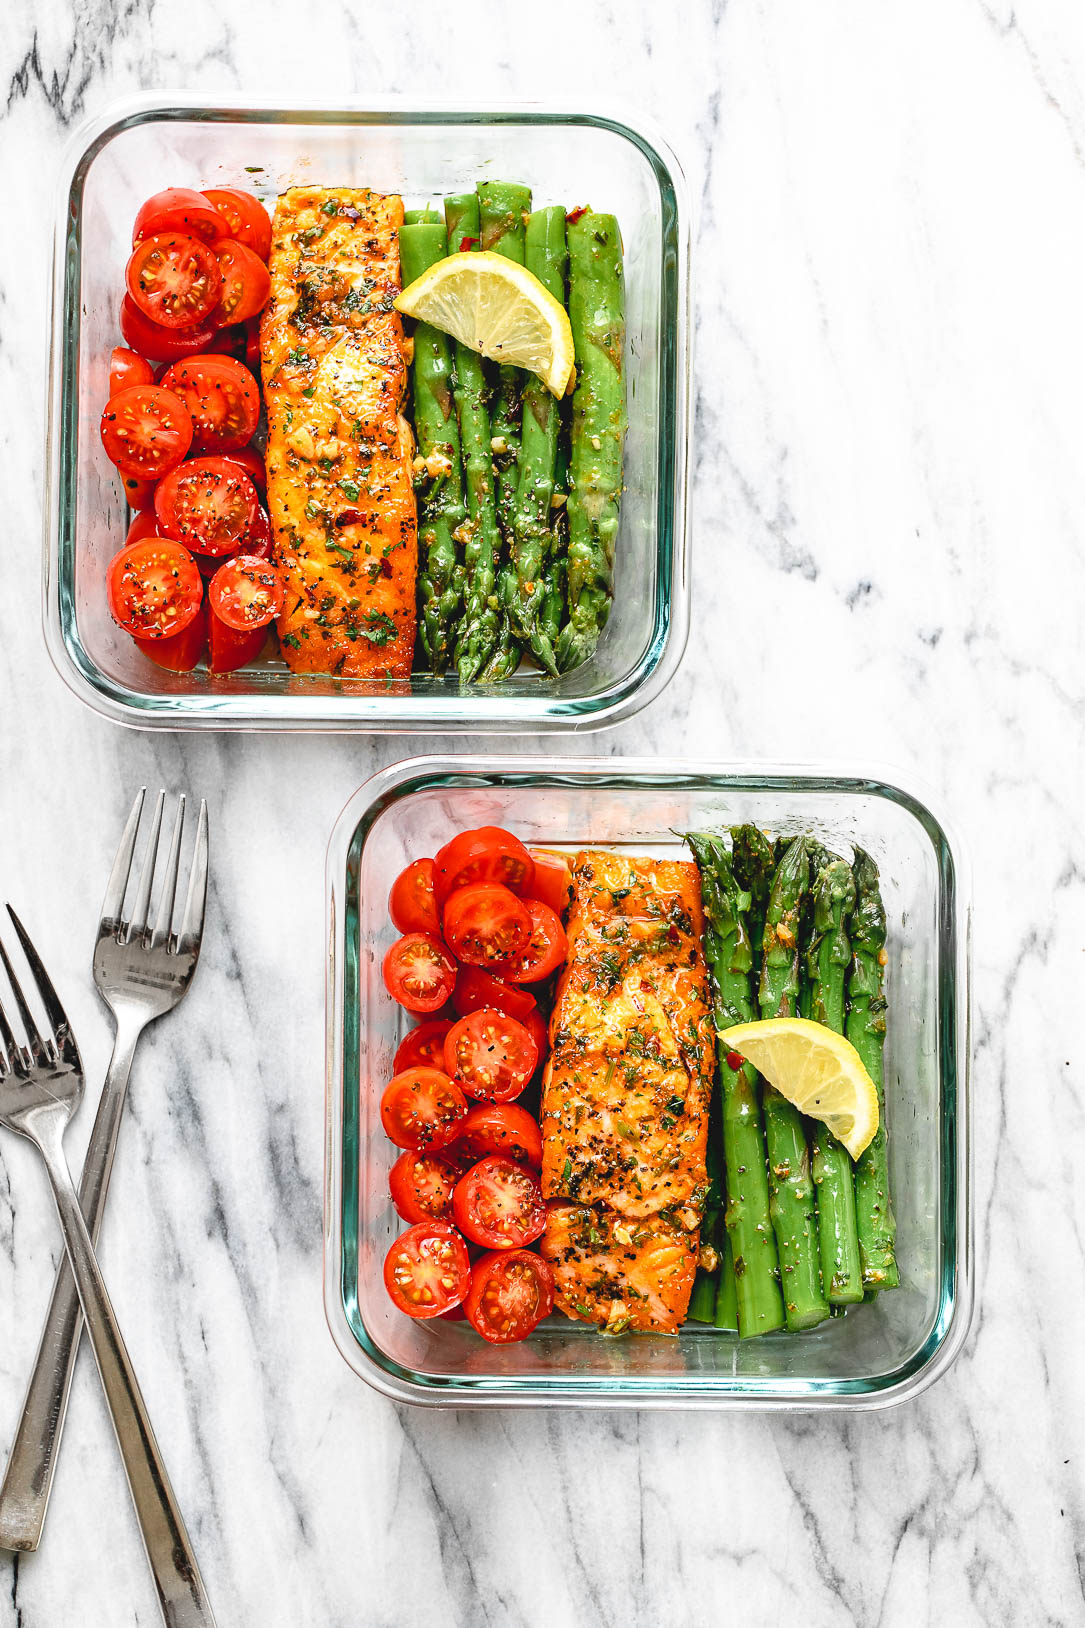 Meal-Prep Garlic Butter Salmon with Asparagus Recipe – Meal Prep Salmon  Recipe — Eatwell101